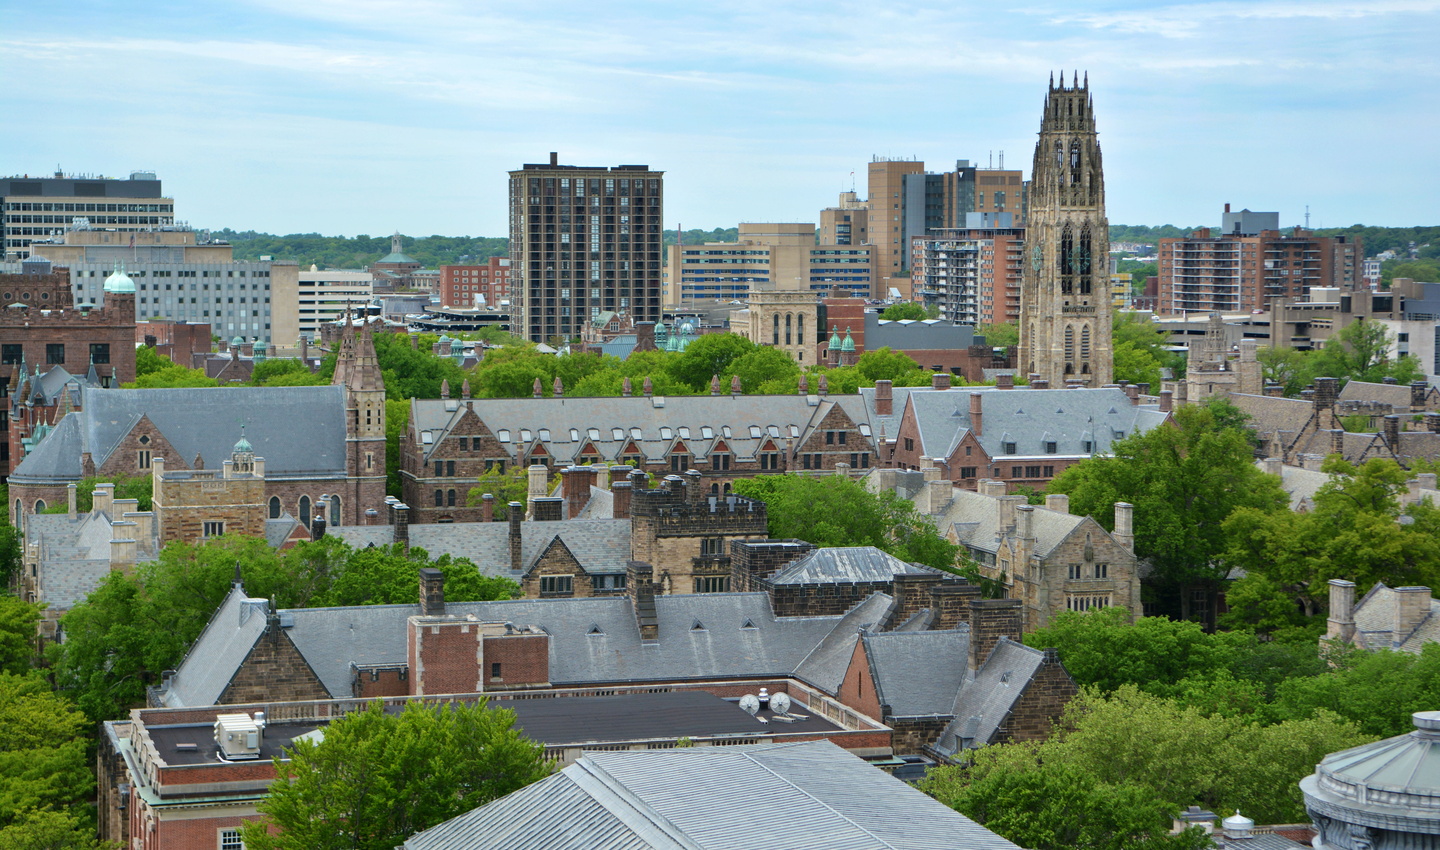 Aerial view of Yale campus buildings